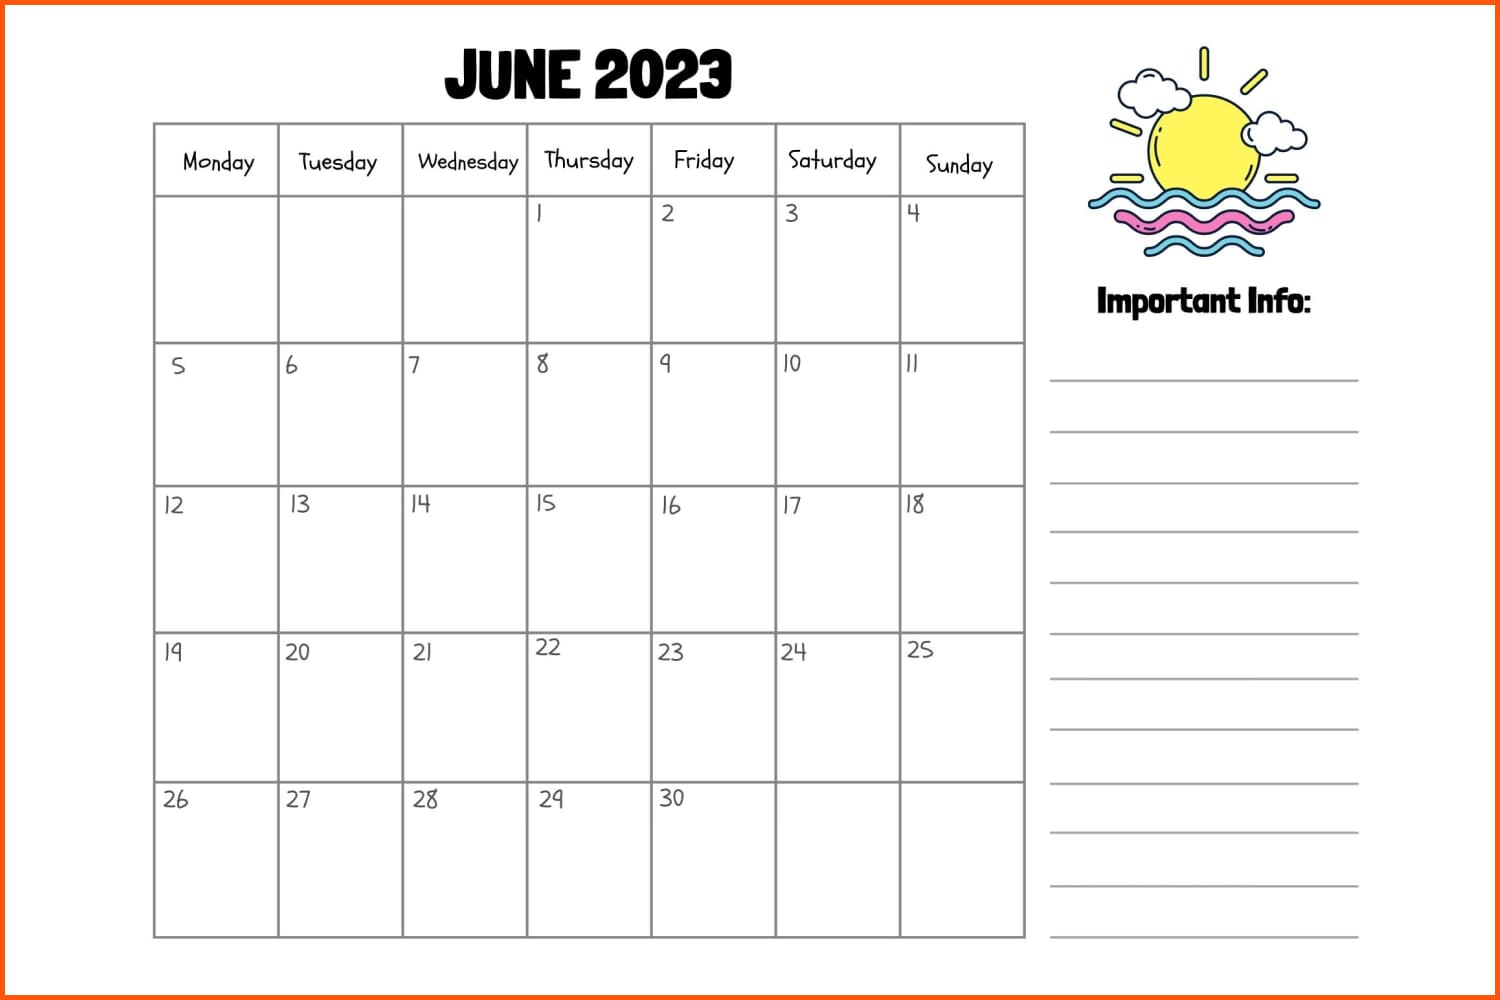 June calendar with sun pattern and space for notes.